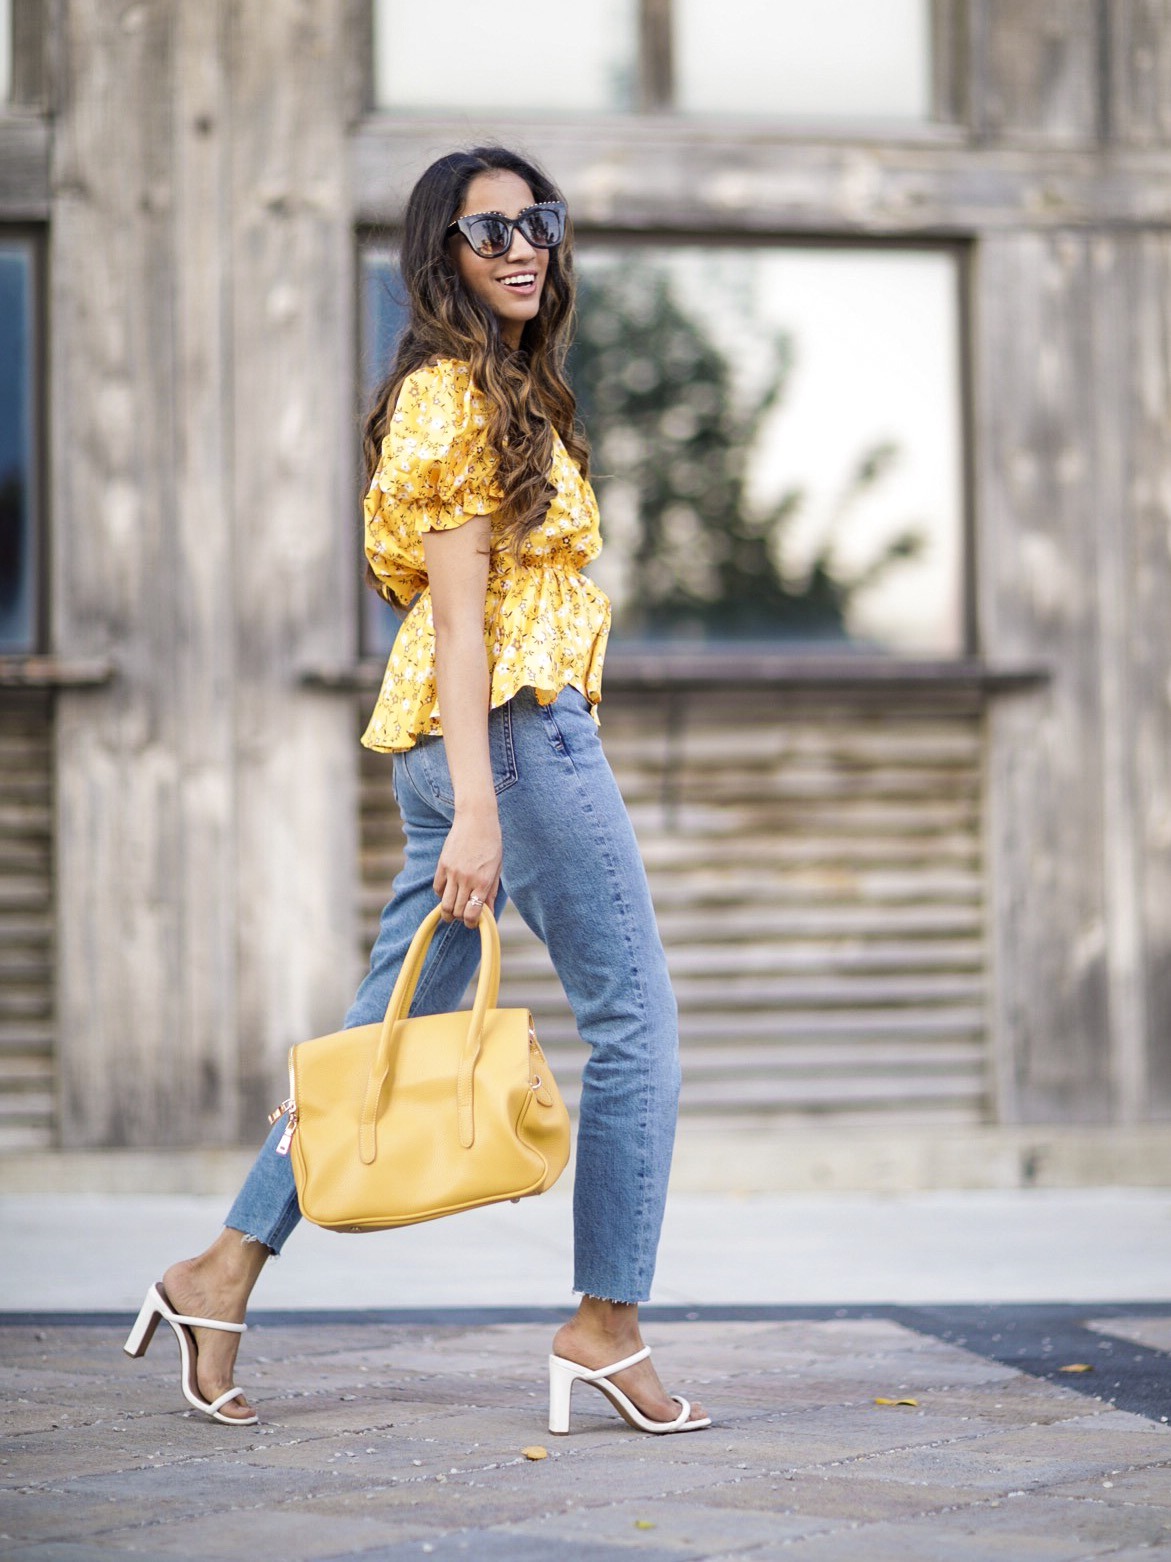 Add these Trending Summer Shoes to your Wishlist High Heels Mule Sandals by Steve Madden White heels 2019 trend Sincerely Humble Faiza Inam Puffy Sleeves Bouse Yellow Floral 4